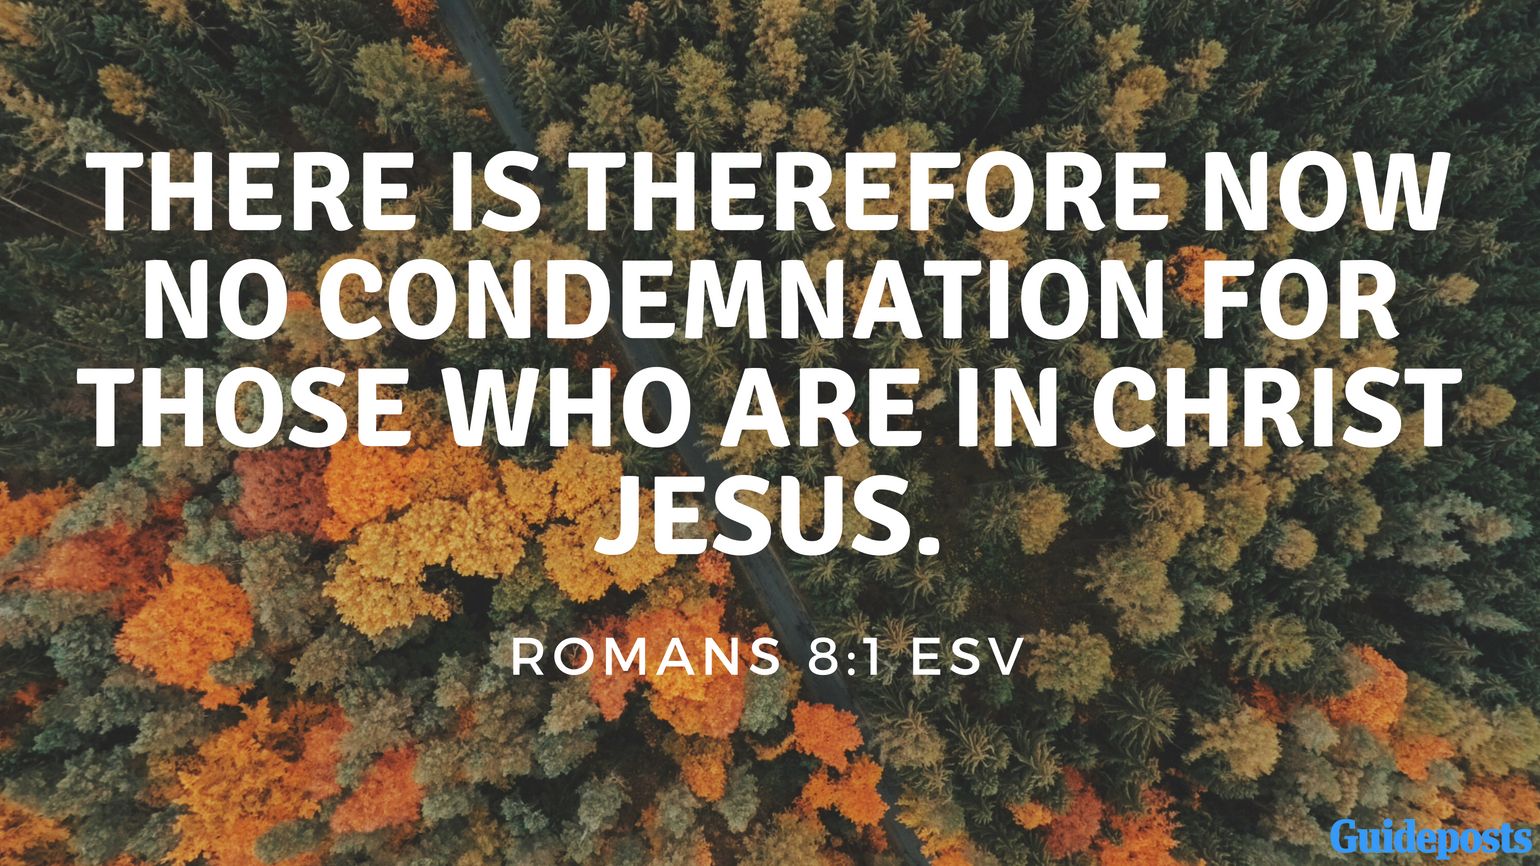 Bible Verses to Help You Forgive Yourself: There is therefore now no condemnation for those who are in Christ Jesus. Romans 8:1 ESV better living life advice